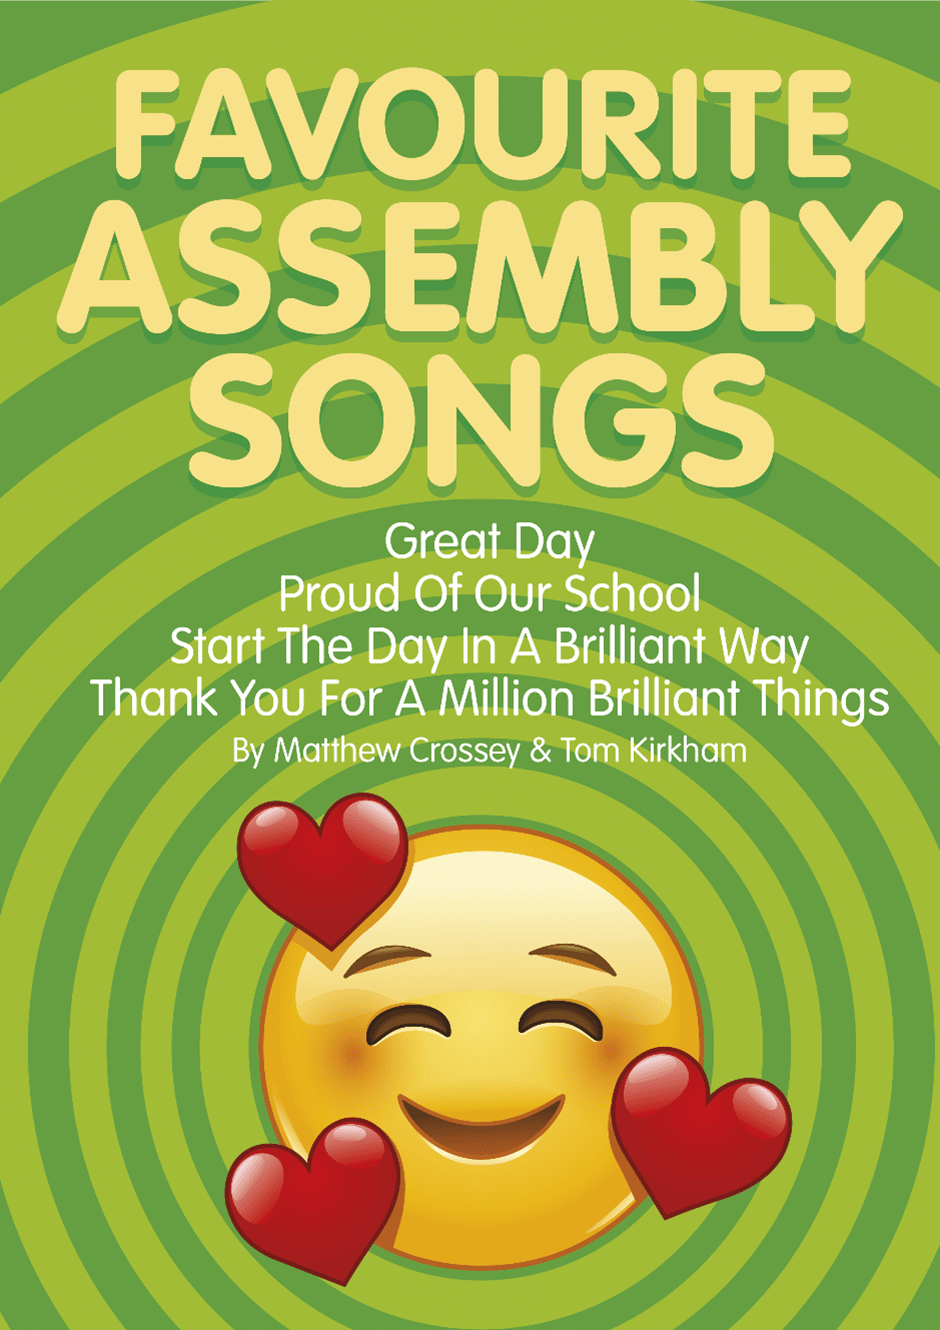 Favourite Assembly Songs Download Pack - Free With Discount Code FAVES100